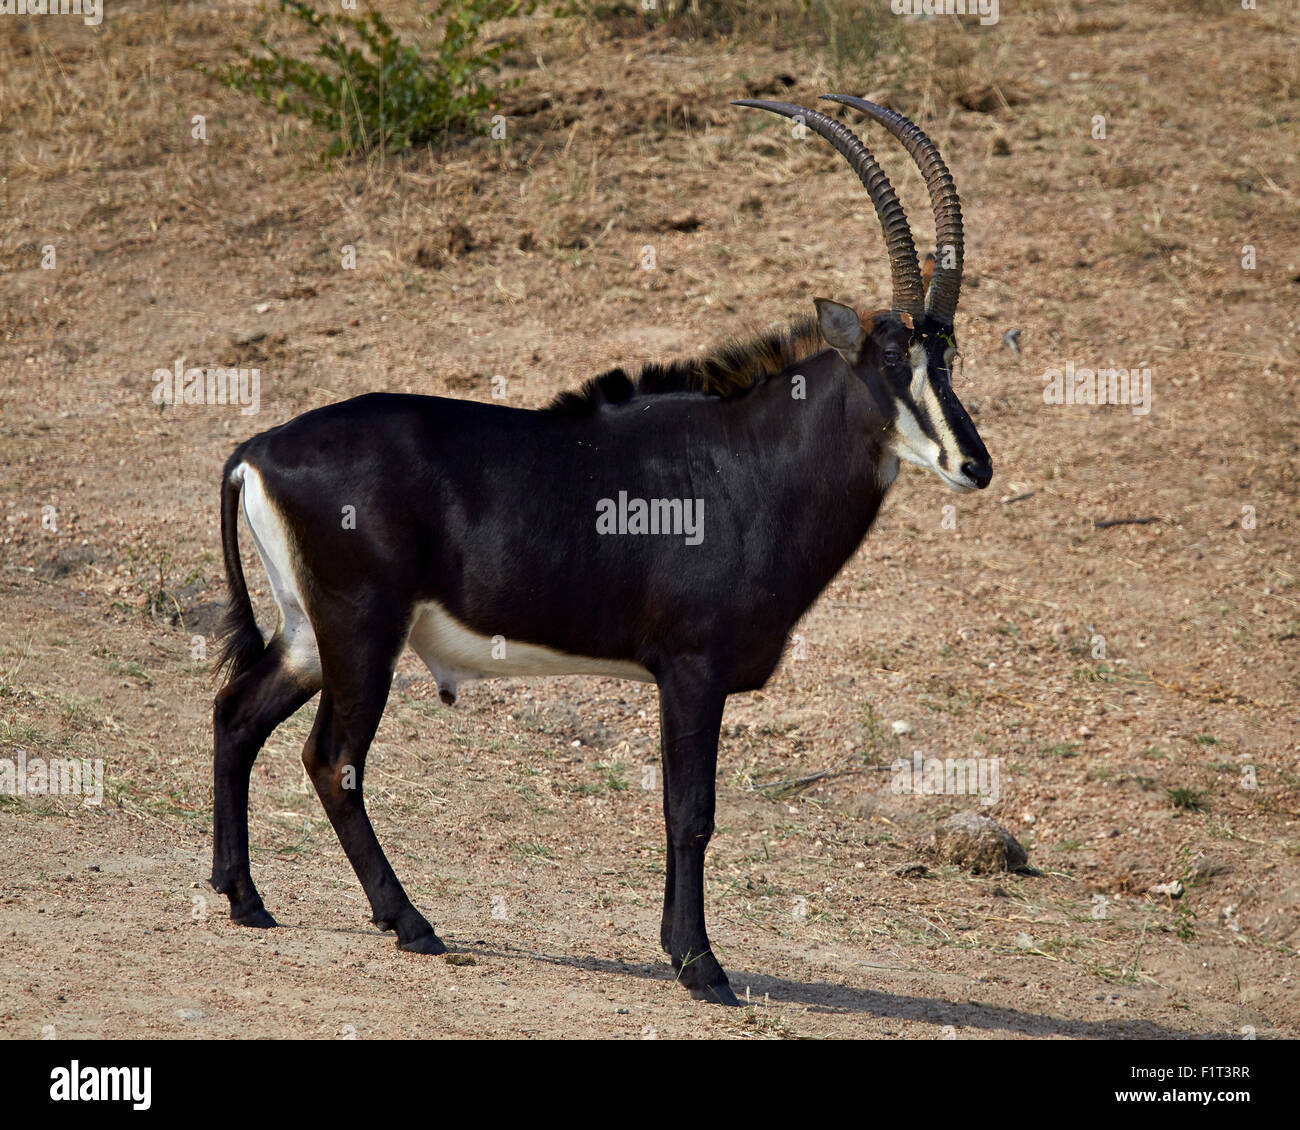 Sable antelope (Hippotragus niger), male, Kruger National Park, South Africa, Africa Stock Photo